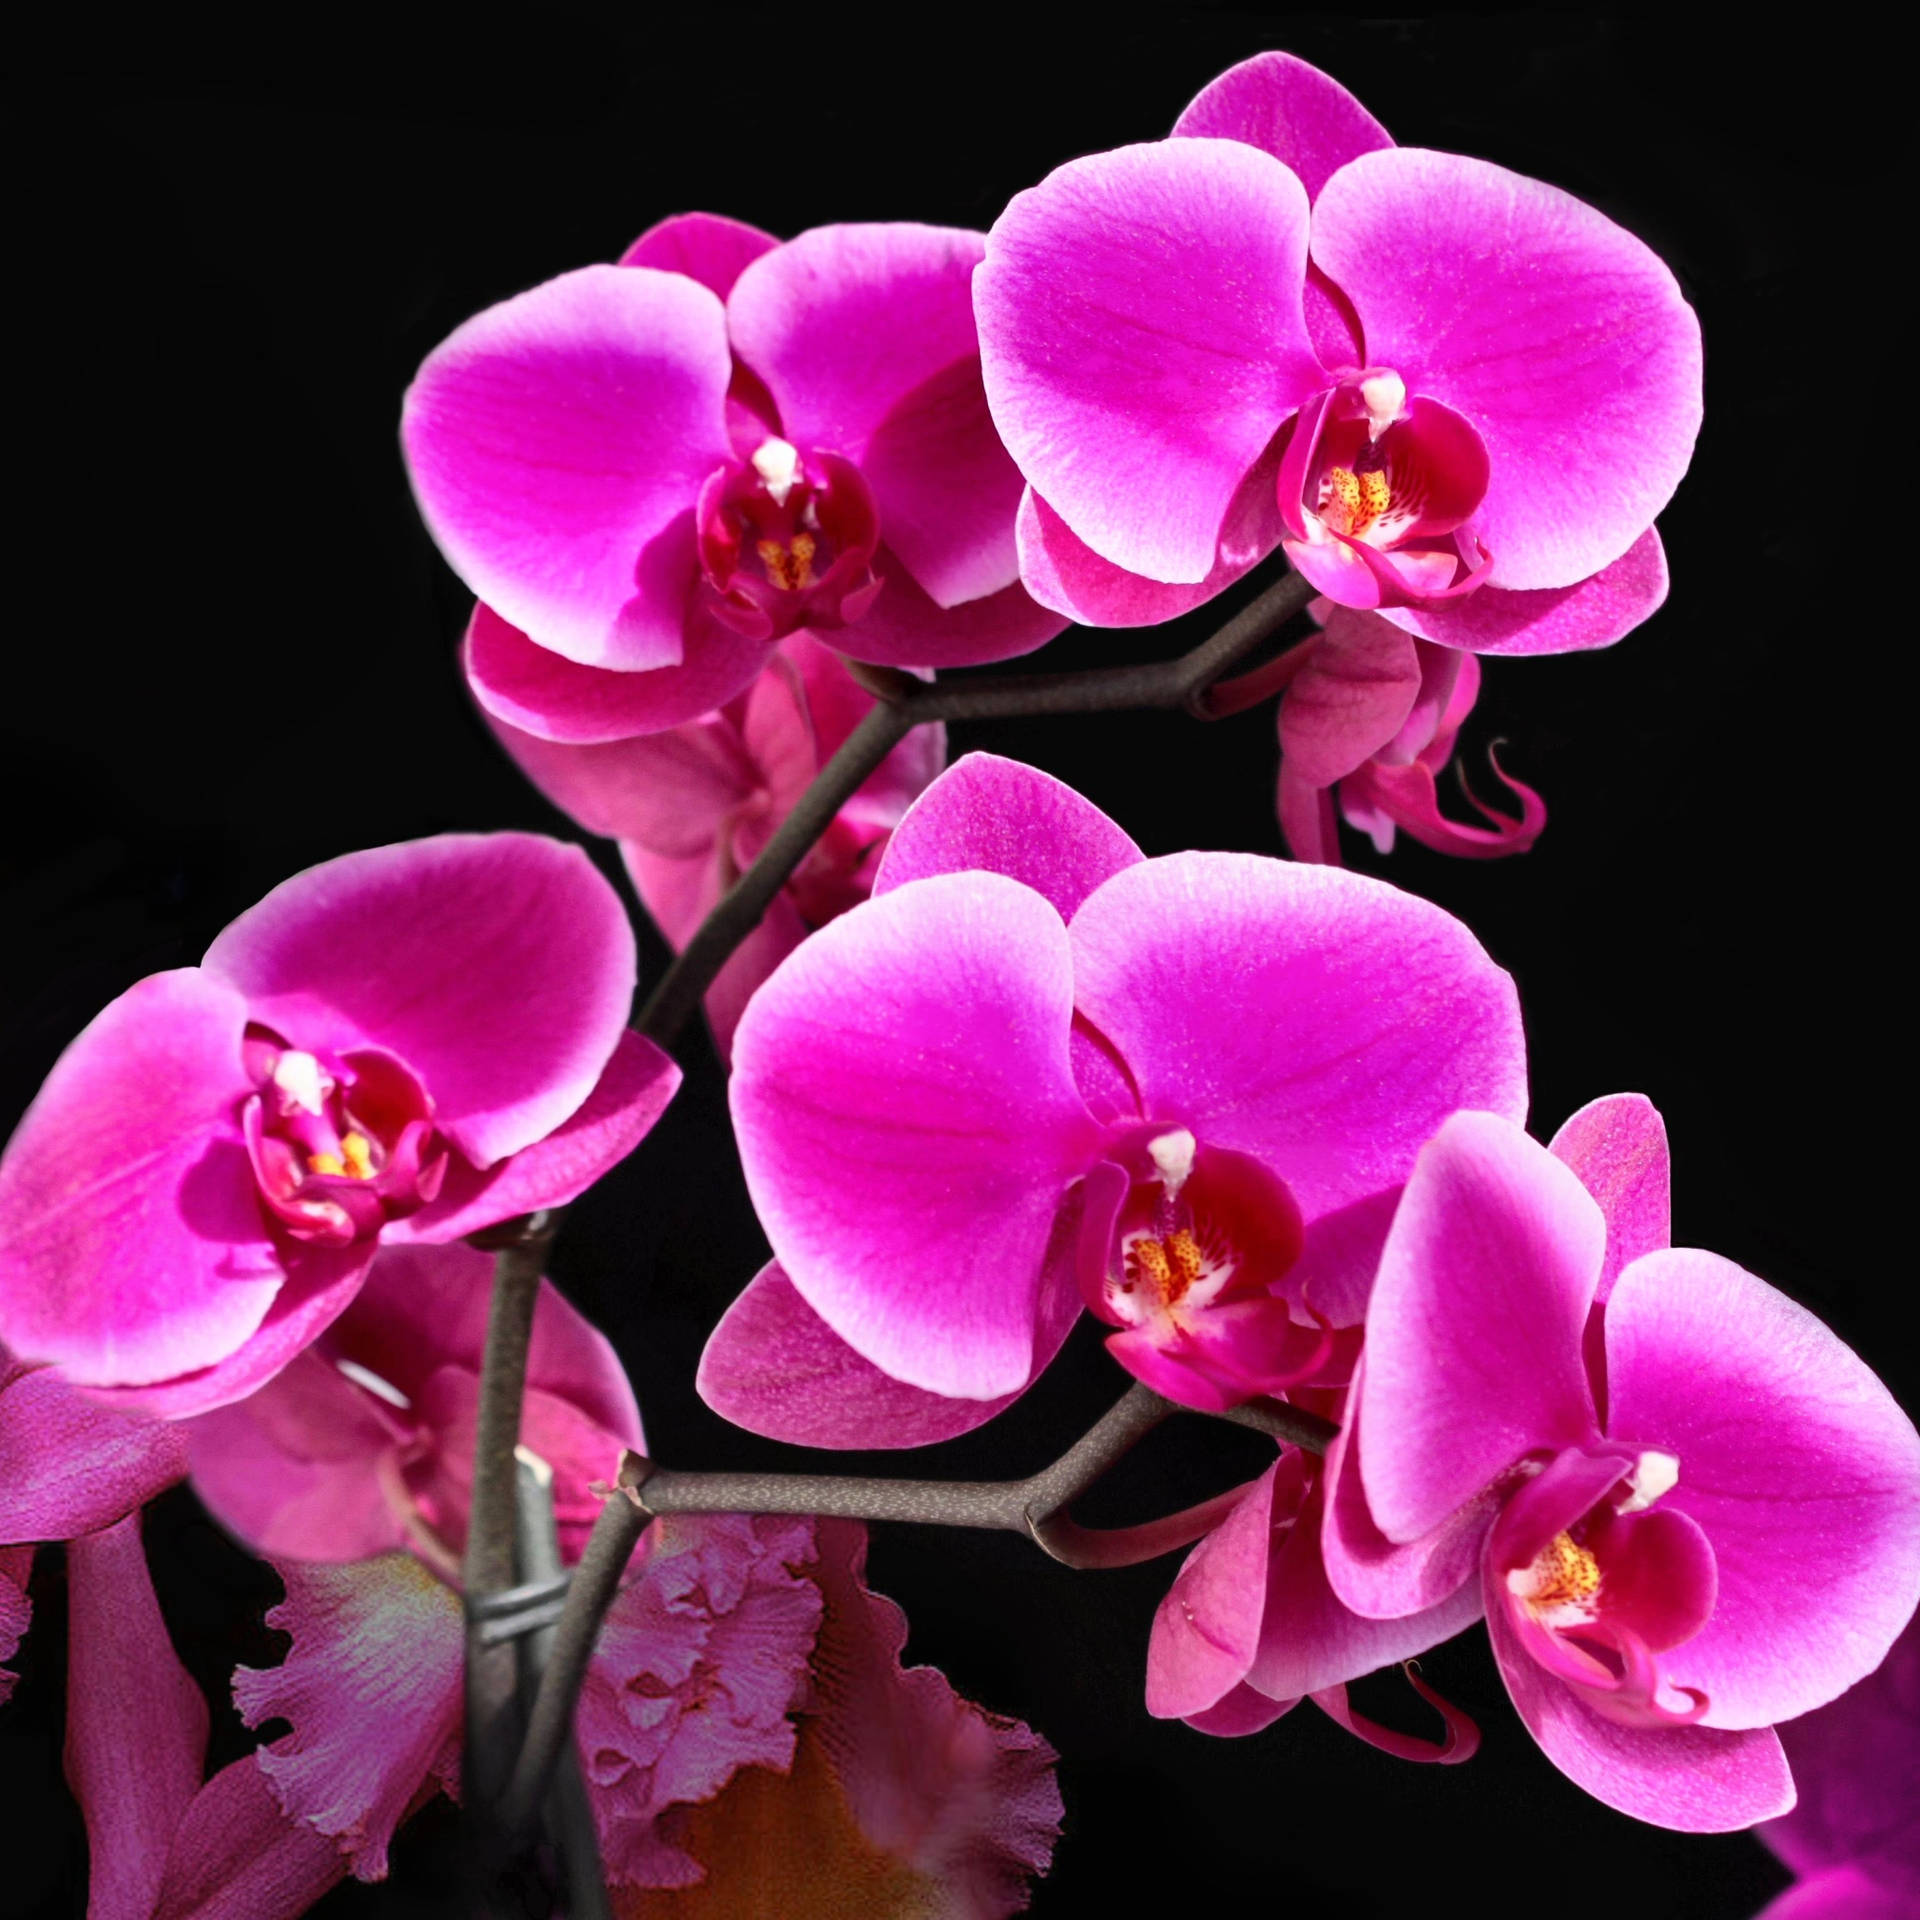 Pink orchid flowers image wallpaper.